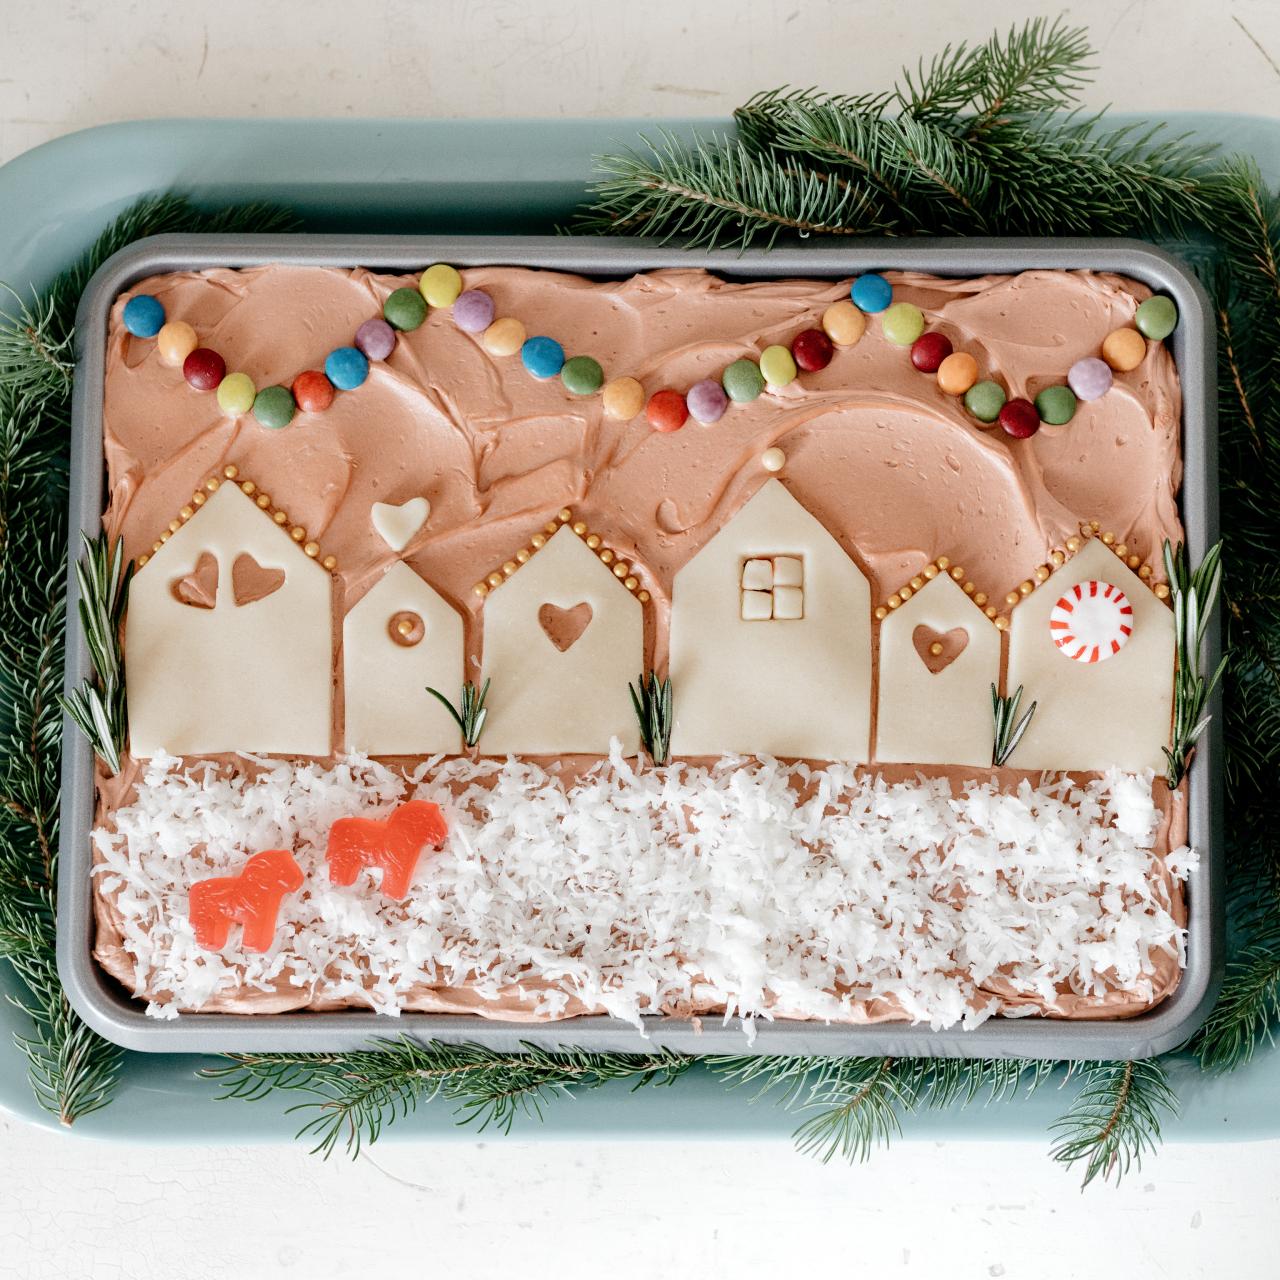 Airline Cookie Sheet Cake Recipe, Molly Yeh